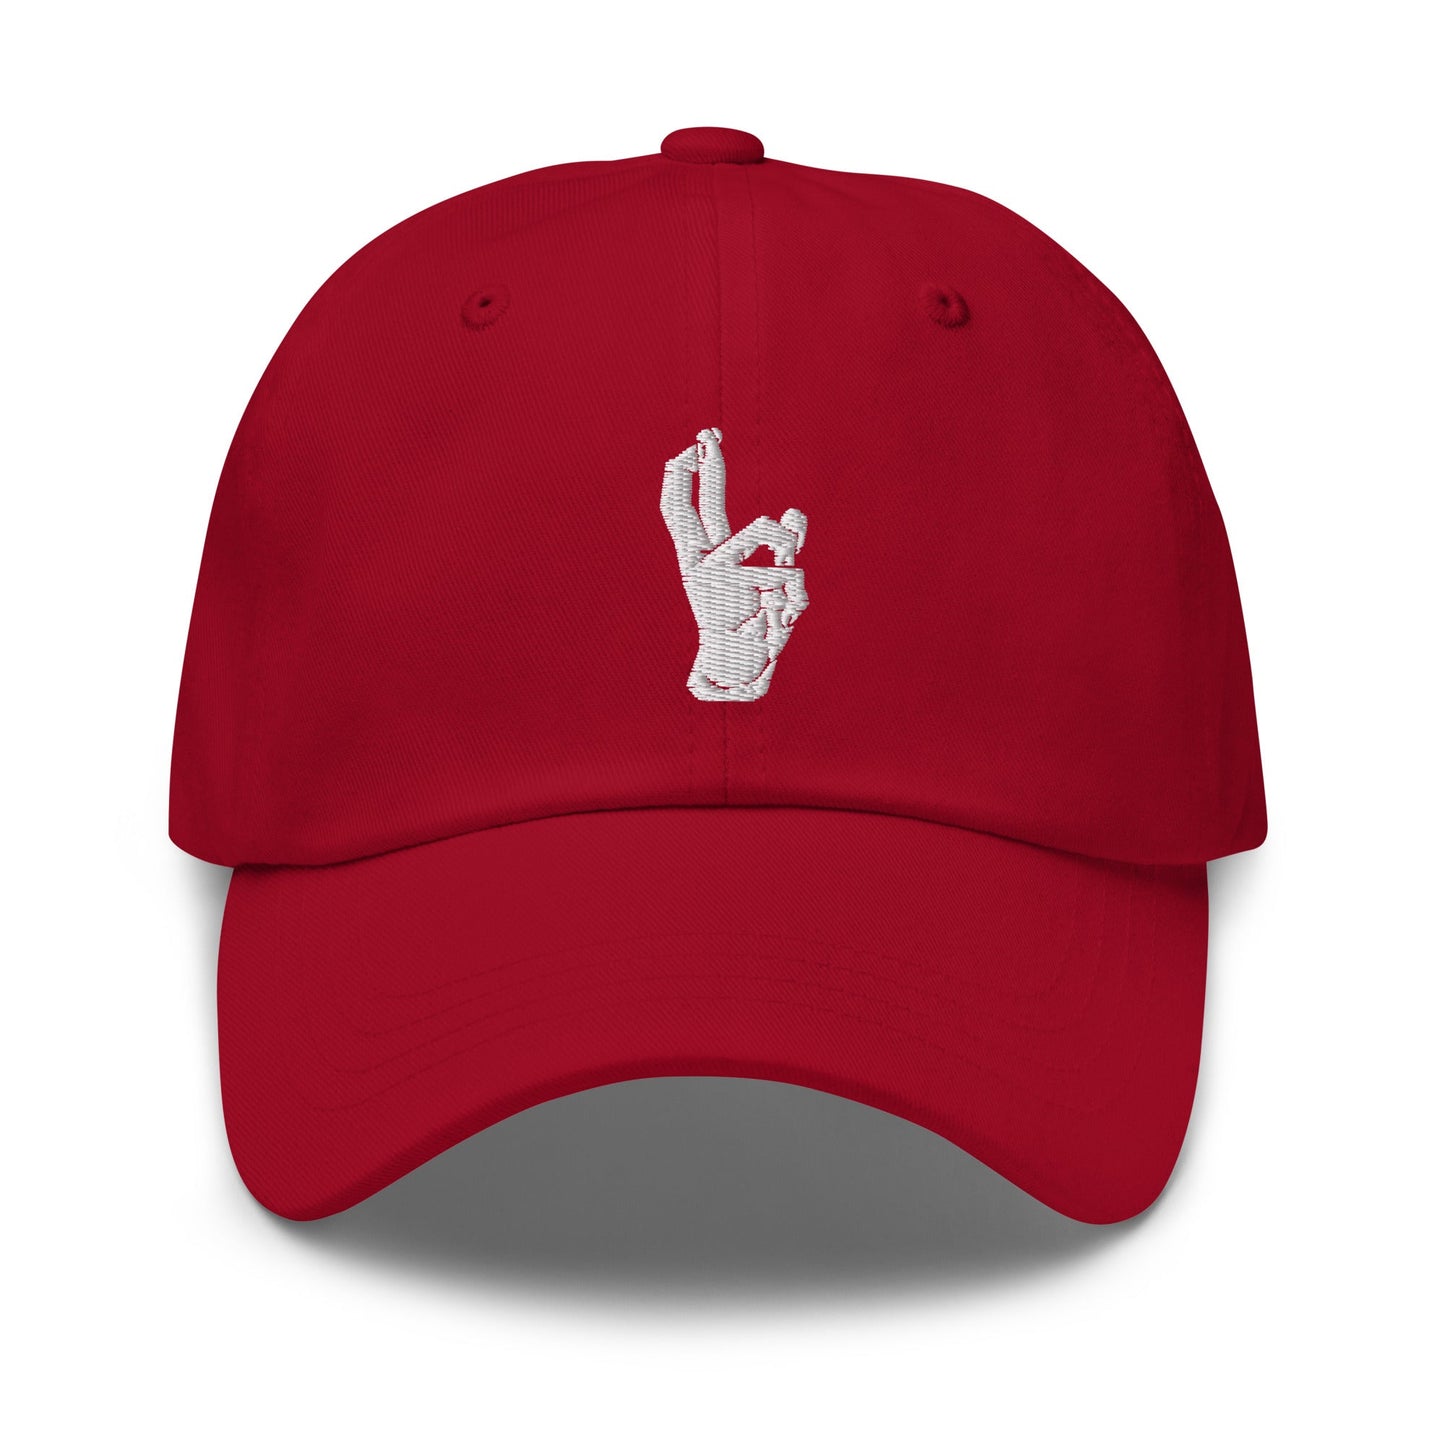 Domain Expansion Anime Embroidered Dad Hat